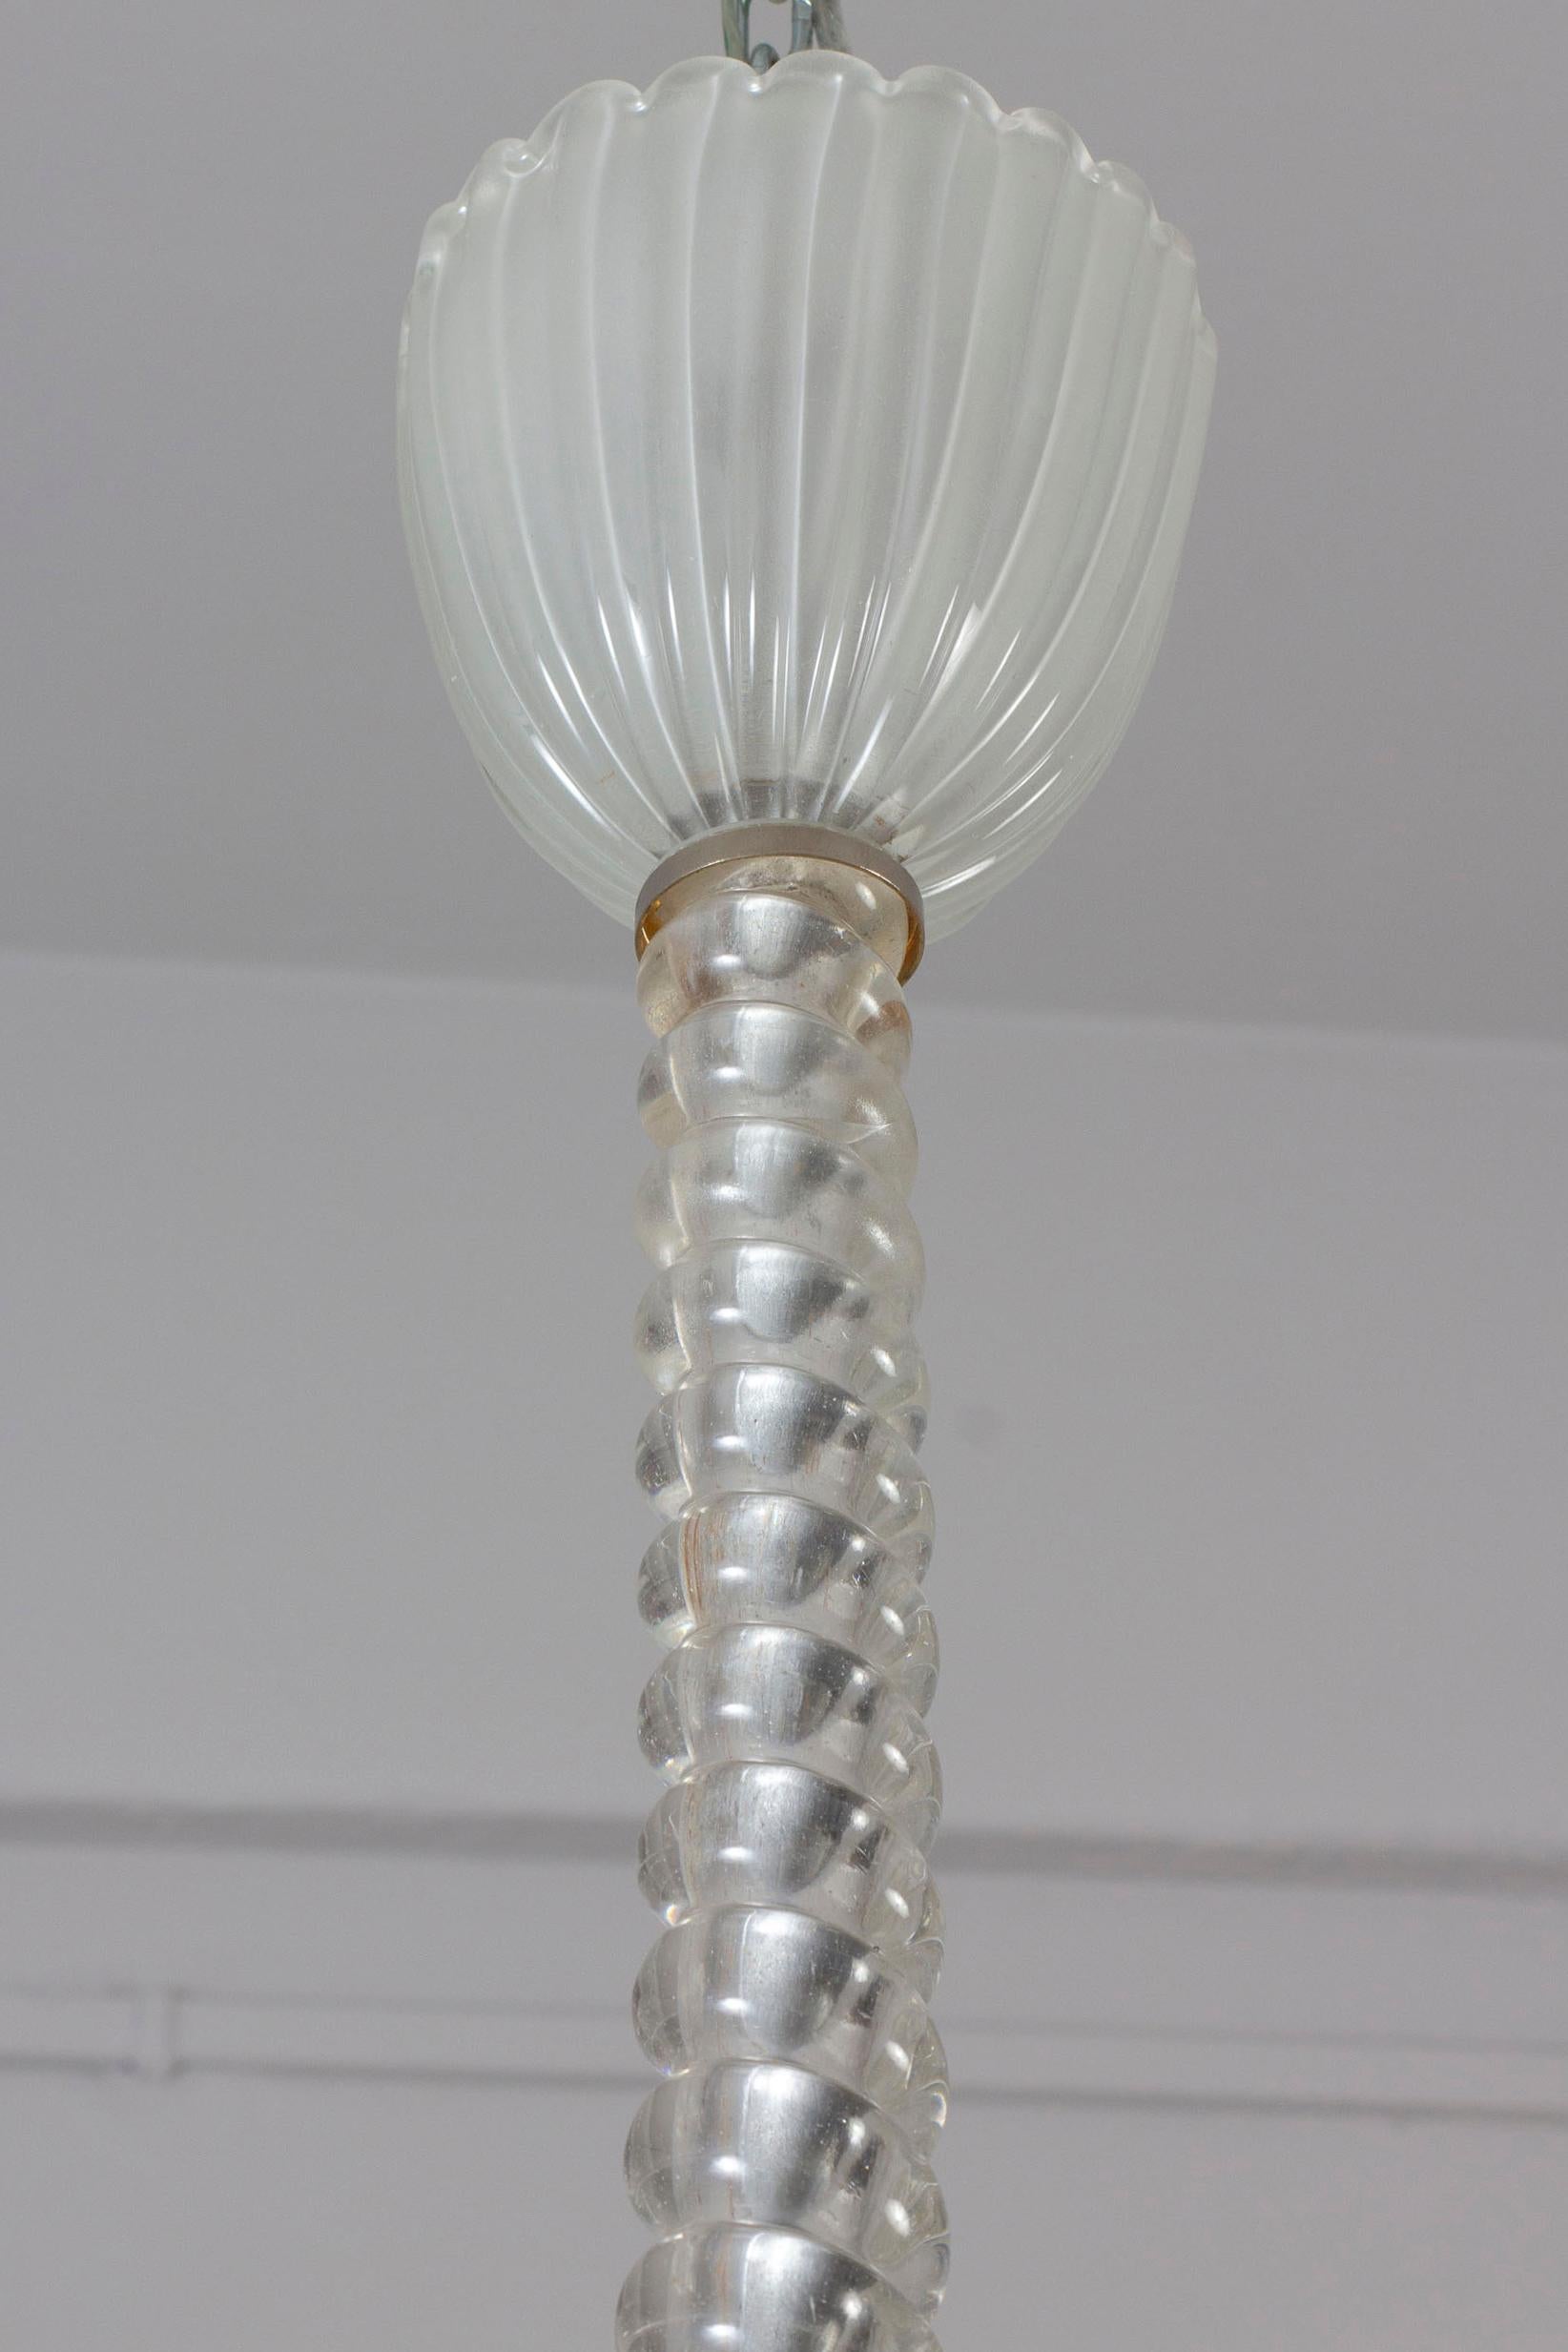 Superb Art Deco Ninfea Murano Glass Chandelier by Barovier Italy, 1940 For Sale 4